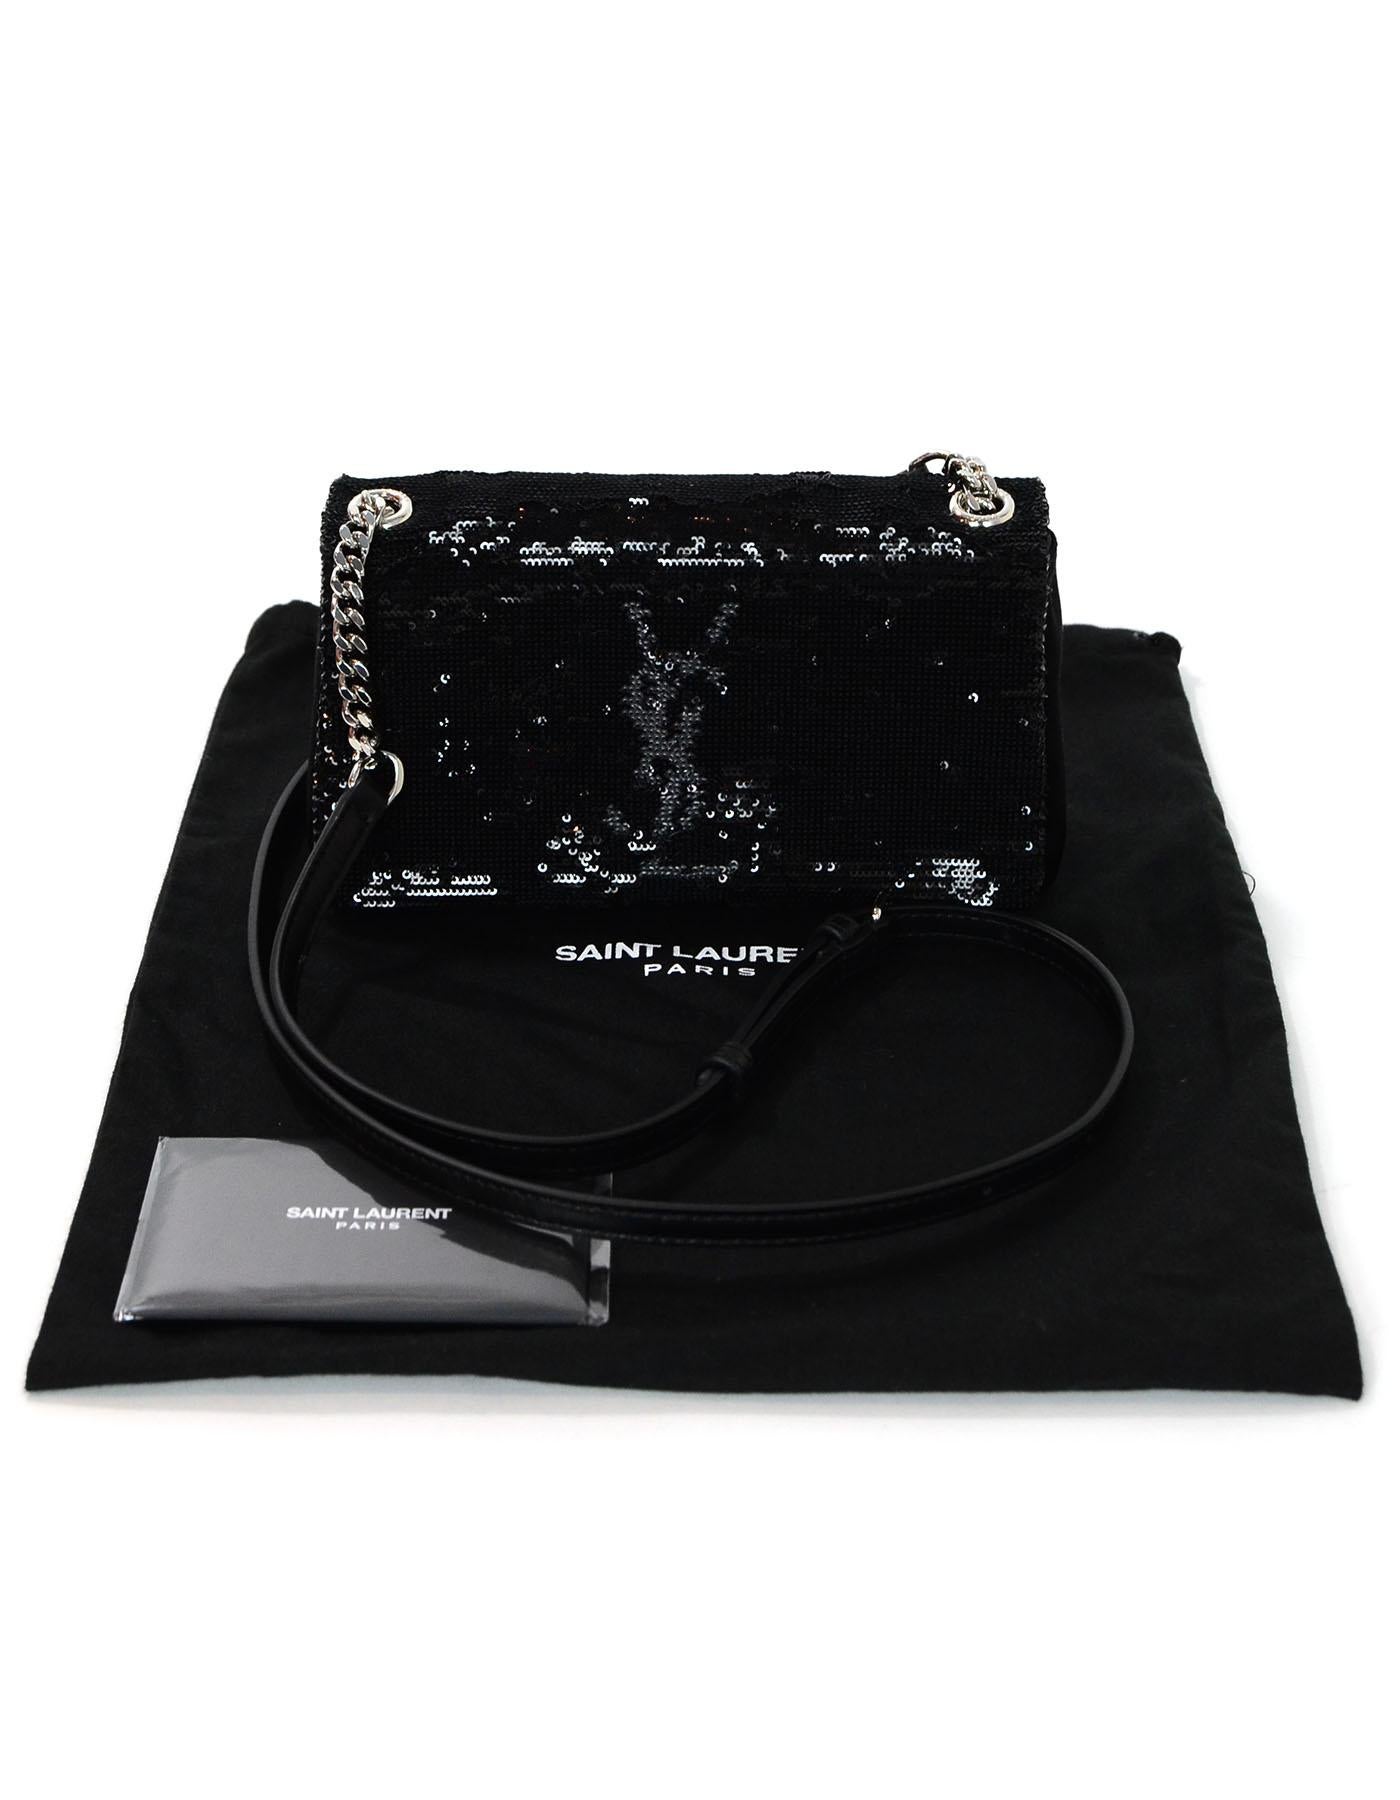 Saint Laurent Black/Silver Sequin Toy West Hollywood Crossbody Bag with DB 2